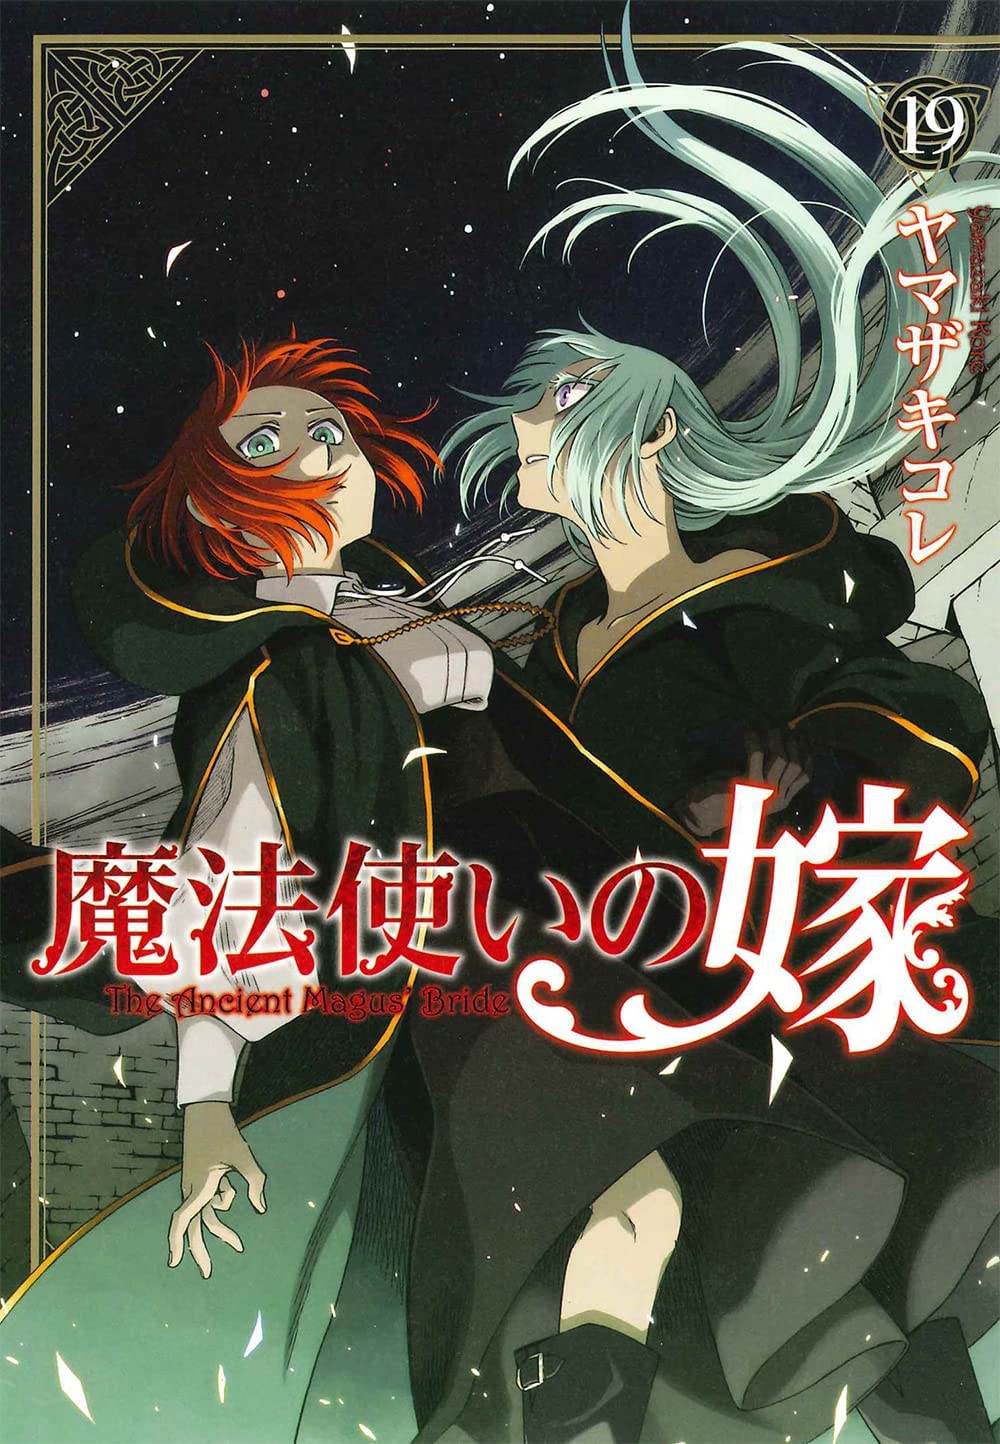 Manga Mogura RE on X: The Ancient Magus Bride by Kore Yamazaki will go  on hiatus for a while. Upon its return it will start a new arc, the Beast  Arc. (Mahoutsukai